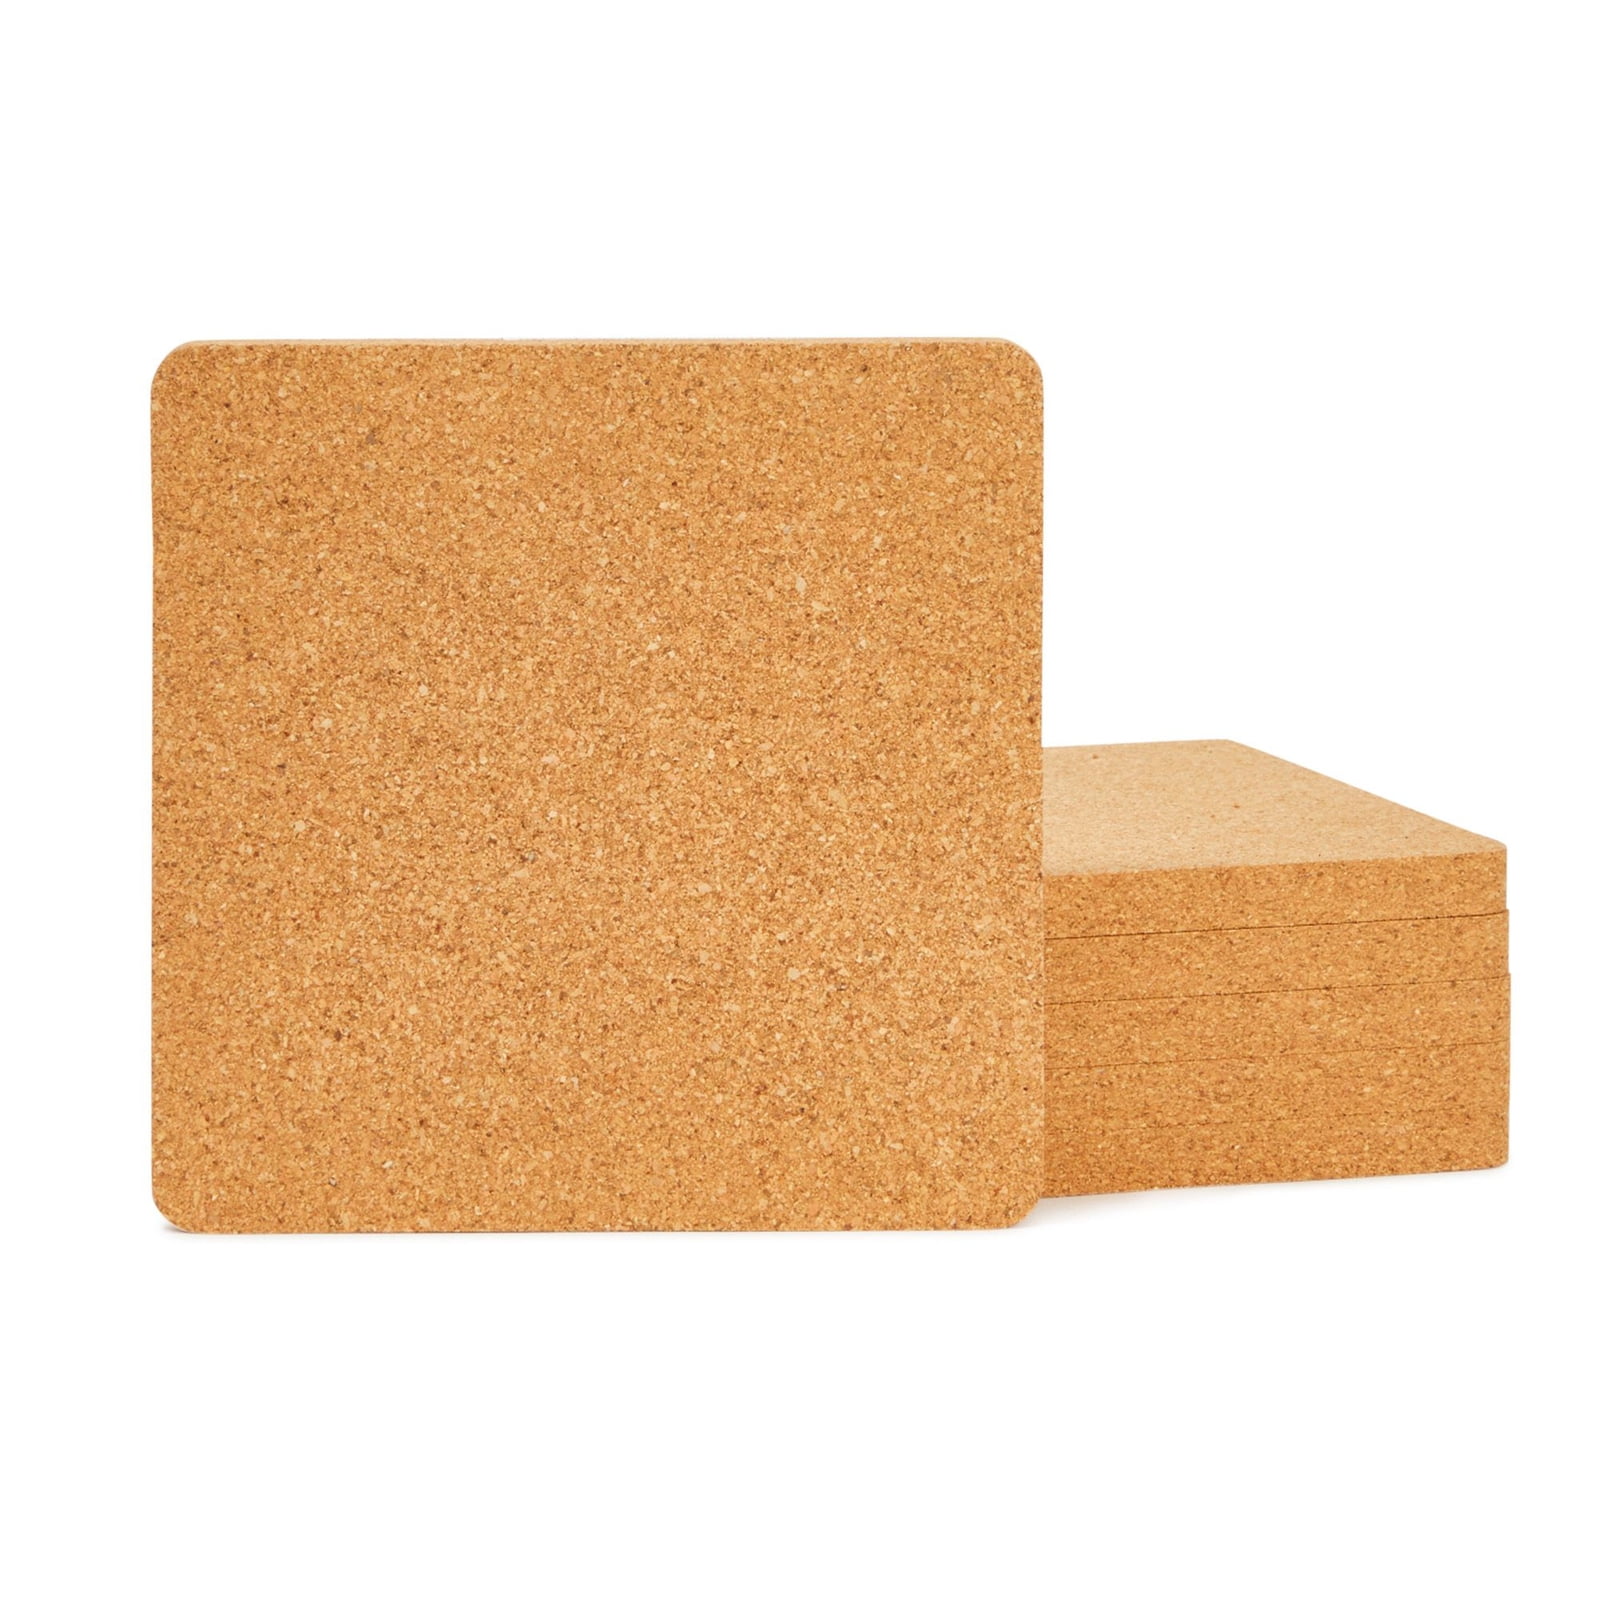 Hot Pads 6.7 inch Round 4 Included to Protect Kitchen Surfaces Cork Trivets 